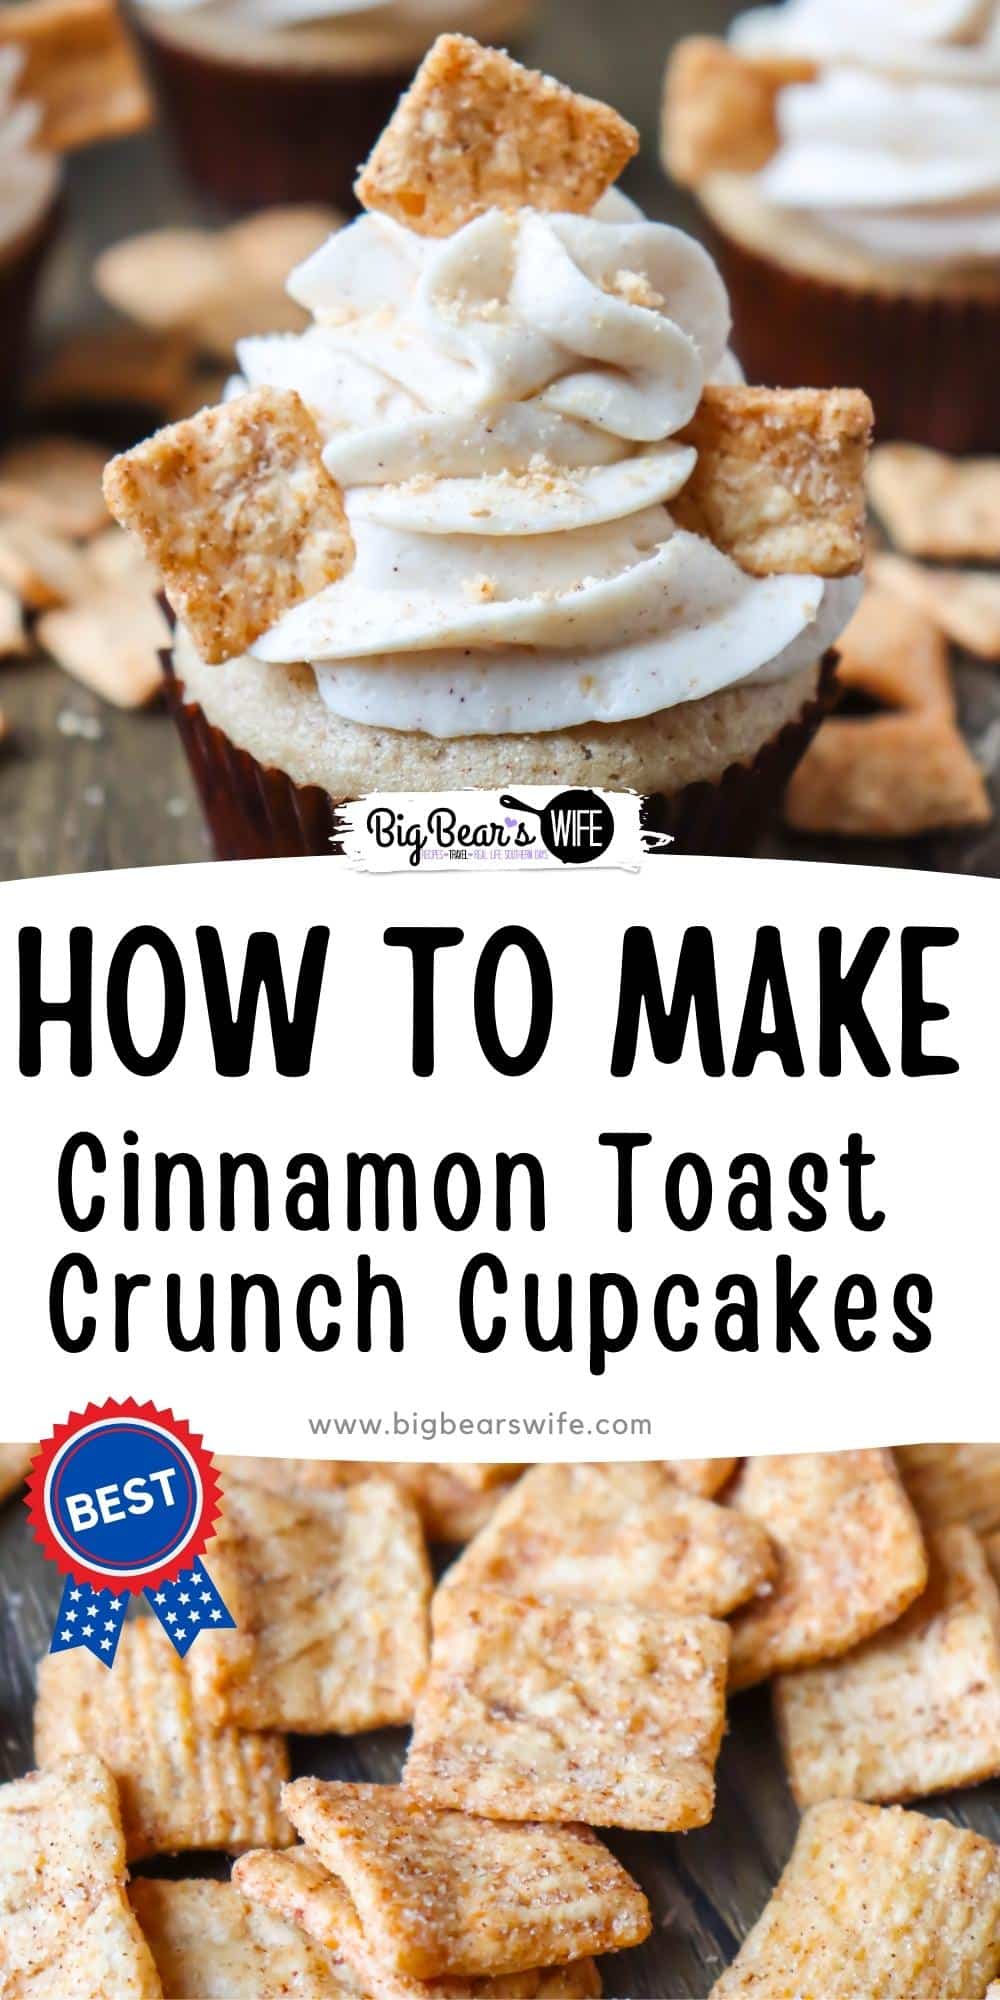 These fun and easy Cinnamon Toast Crunch Cupcakes taste just like your favorite cereal. For ease, we start with a box cake mix that is upgraded with vanilla, cinnamon, and sour cream. Then these breakfast-themed cupcakes are topped with a cream cheese Cinnamon Toast Crunch frosting.  via @bigbearswife